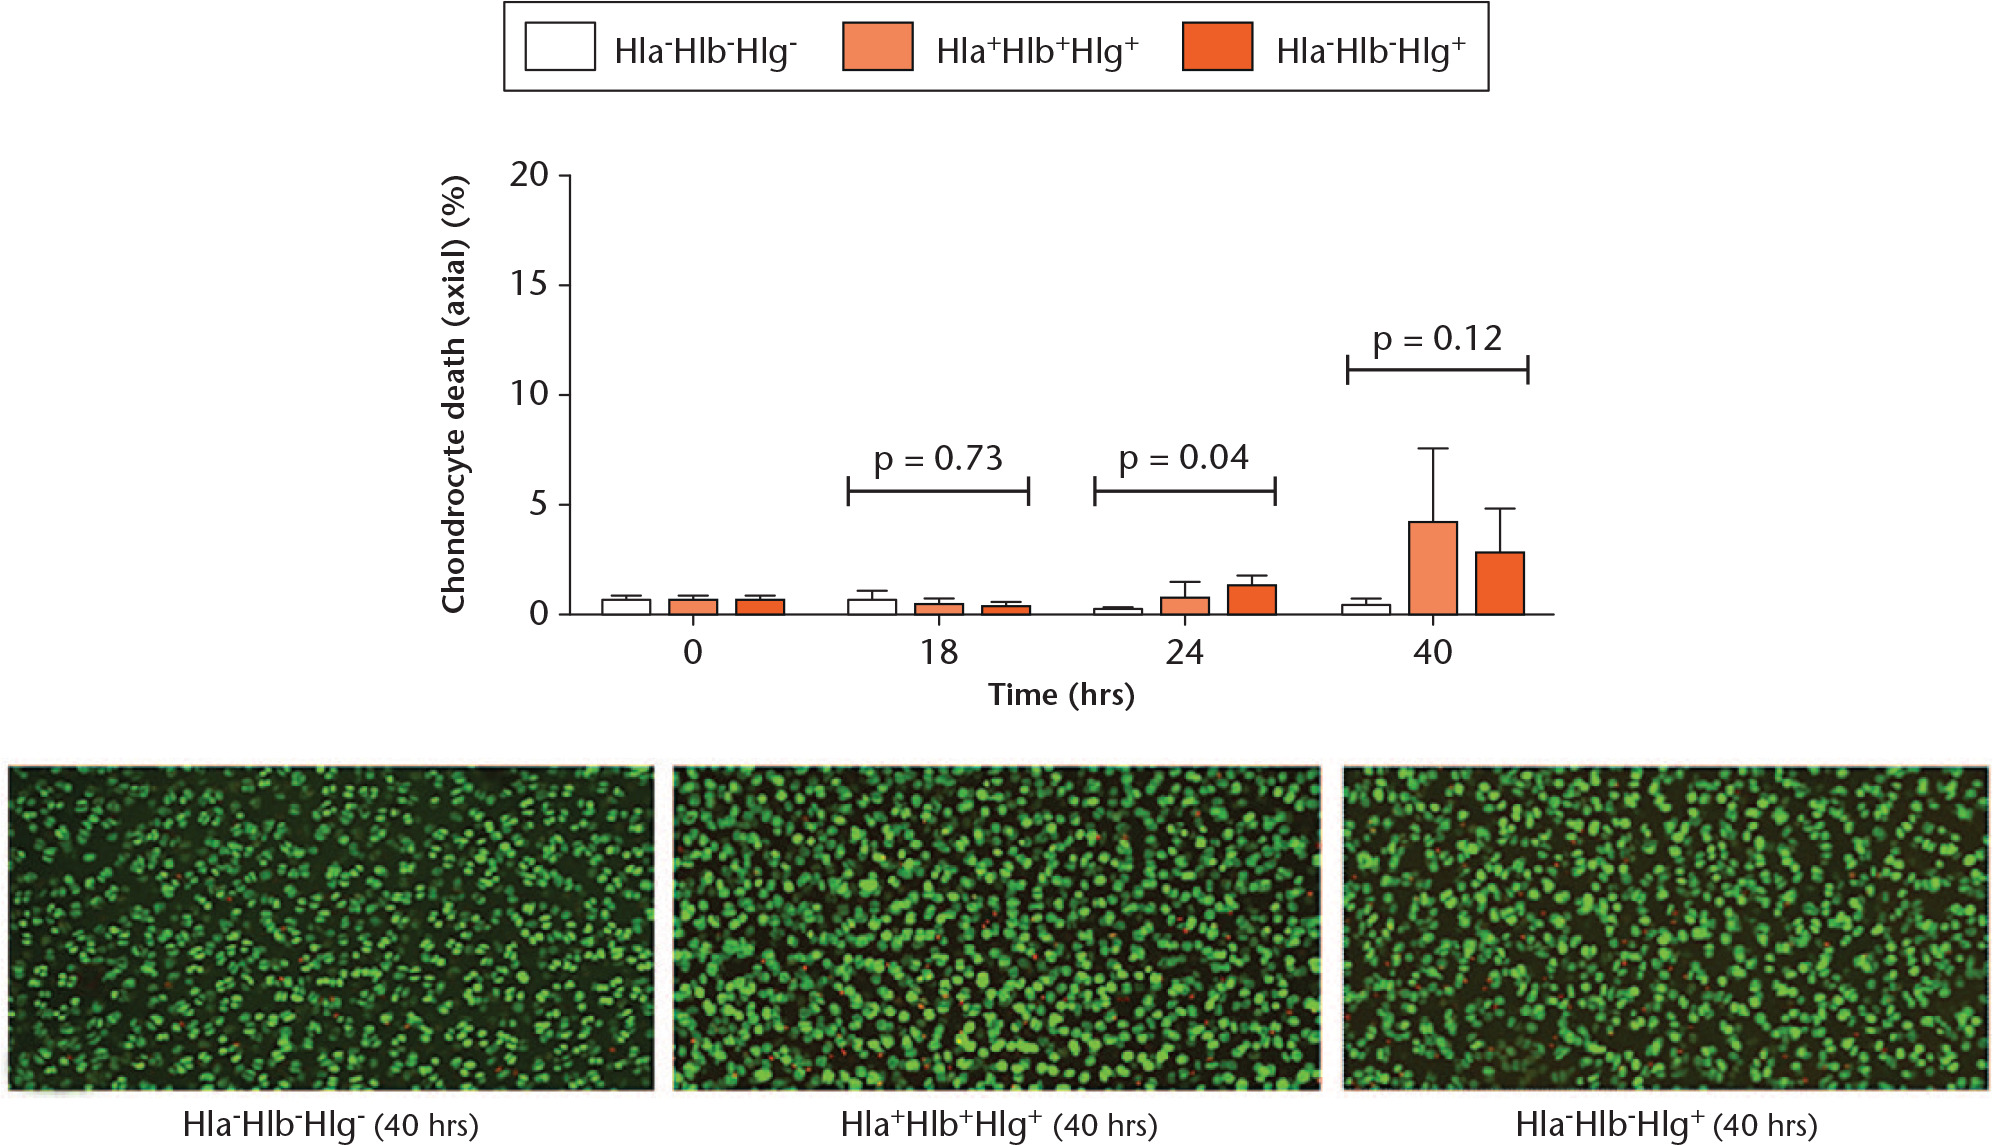 Fig. 3 
            Graph showing that beta-haemolysin (Hlb) and gamma-haemolysin (Hlg) had a negligible effect on in situ chondrocyte viability. Osteochondral explants cultured in the presence of the Hla-Hlb-Hlg-, Hla-Hlb+Hlg+, and Hla-Hlb-Hlg+ strains exhibited minimal chondrocyte death at each timepoint (N = 4 (n = 8); p-values are shown from one-way analysis of variance; *p < 0.05 vs Hla-Hlb-Hlg- strain by post hoc Dunnett’s test). The confocal laser-scanning microscopy images show examples of the chondrocyte death induced by each strain at 40 hours.
          